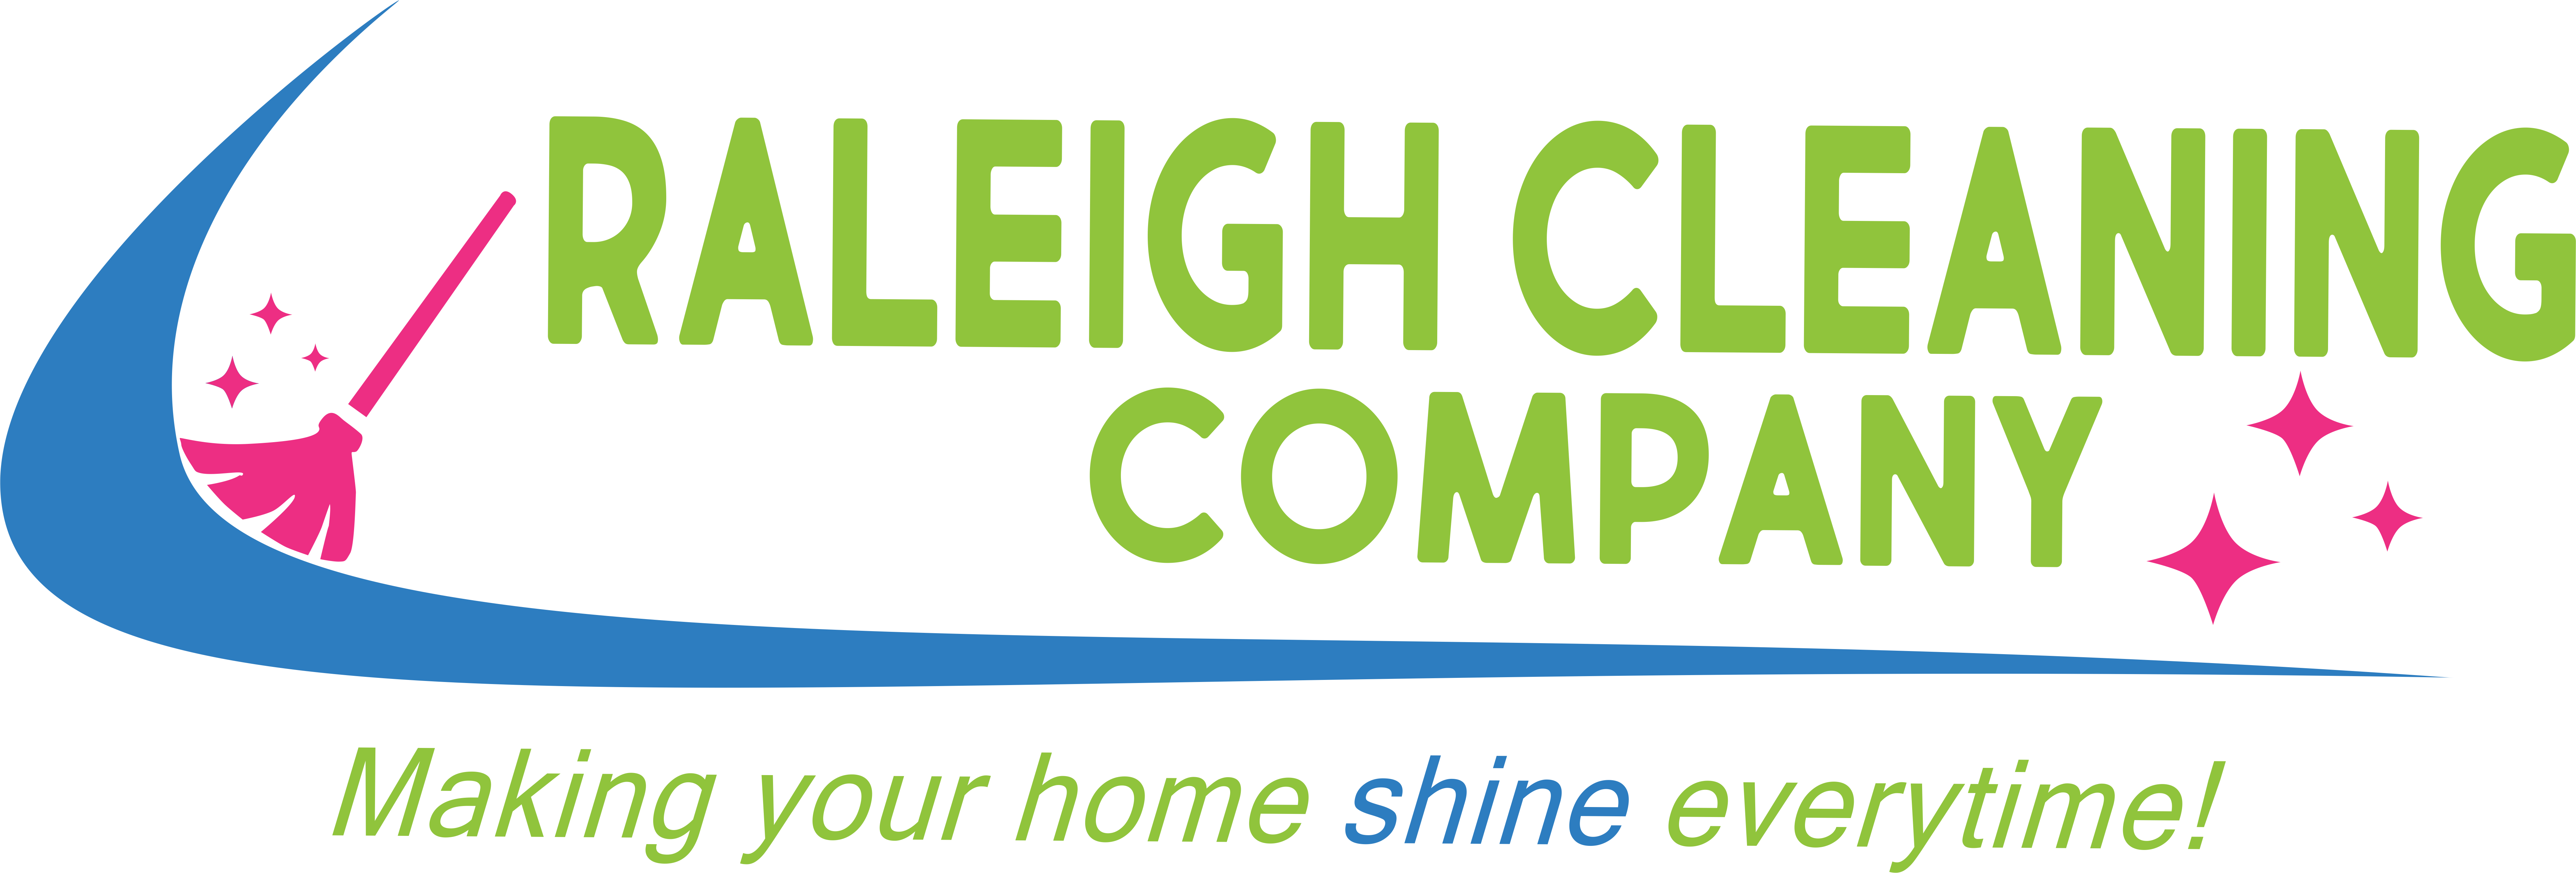 Raleigh Cleaning